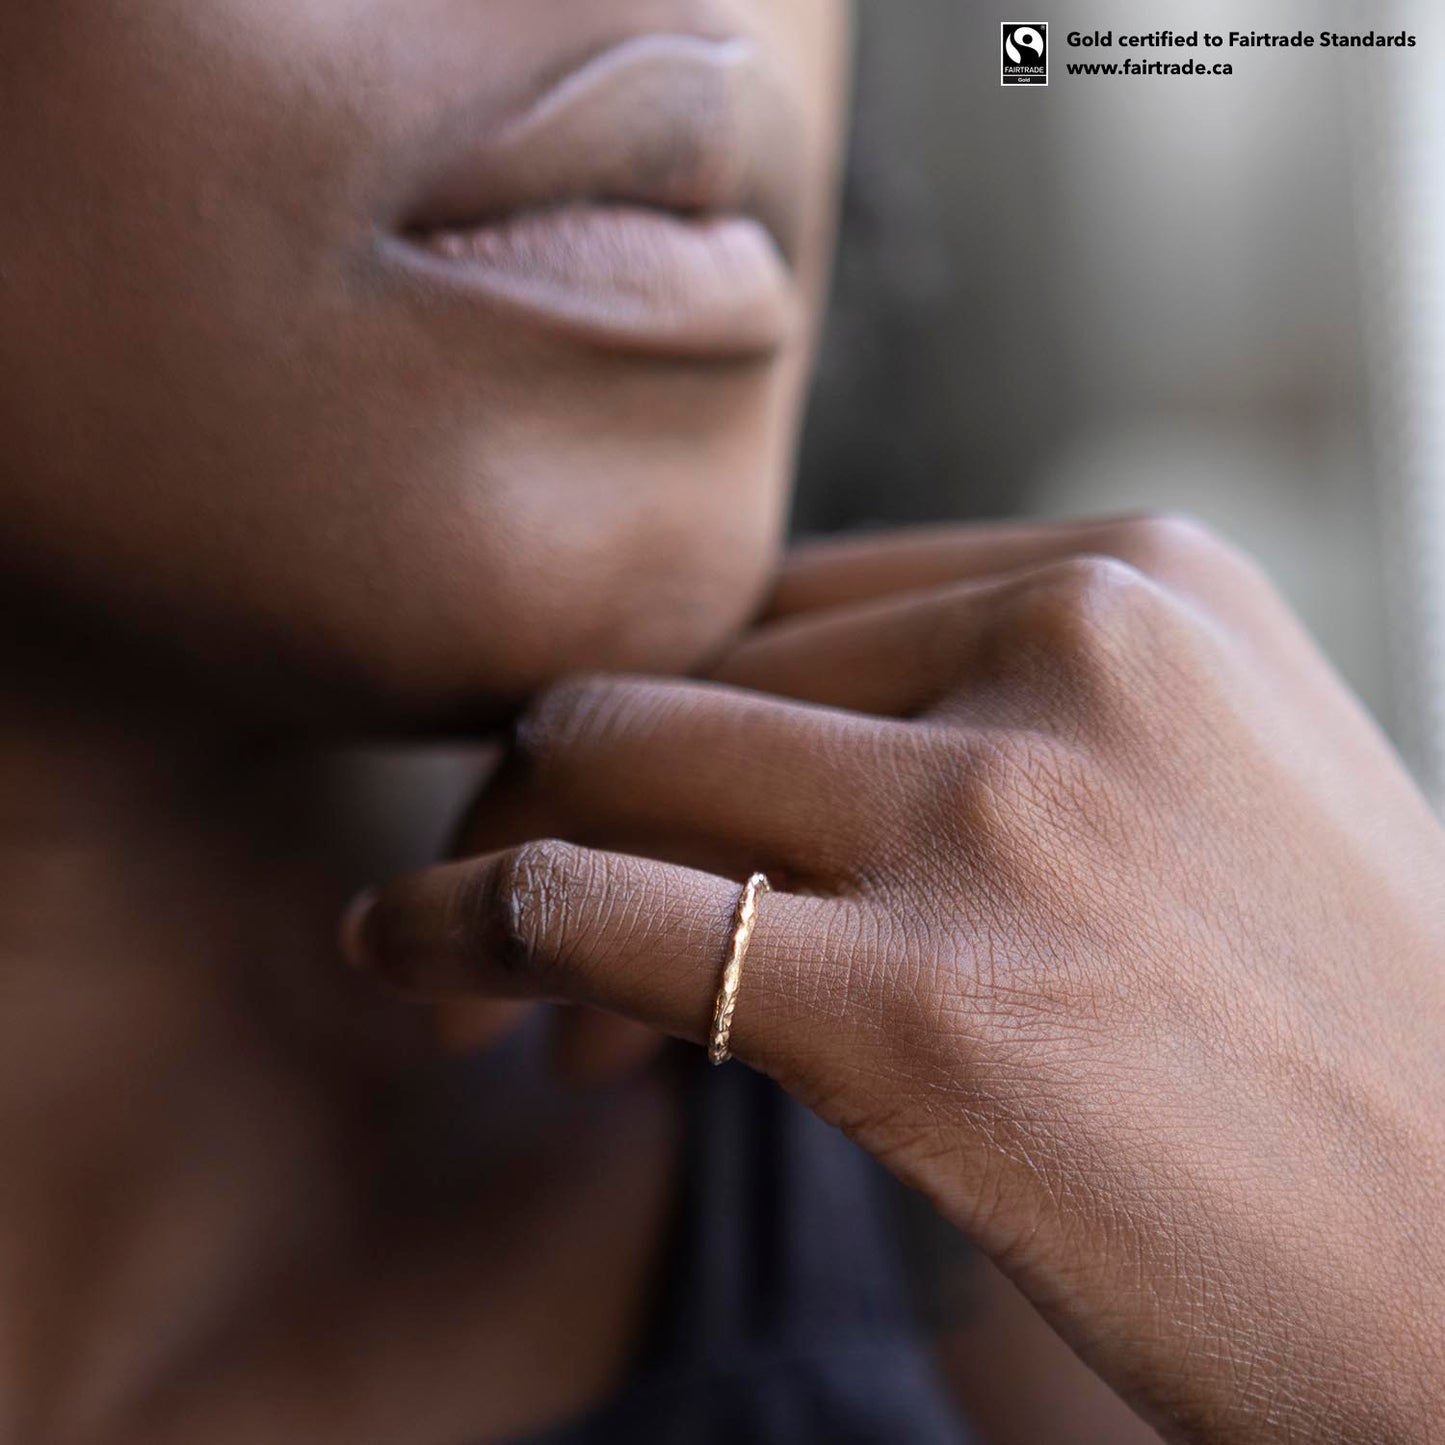 Pillar Ring with Fairtrade Certified Gold